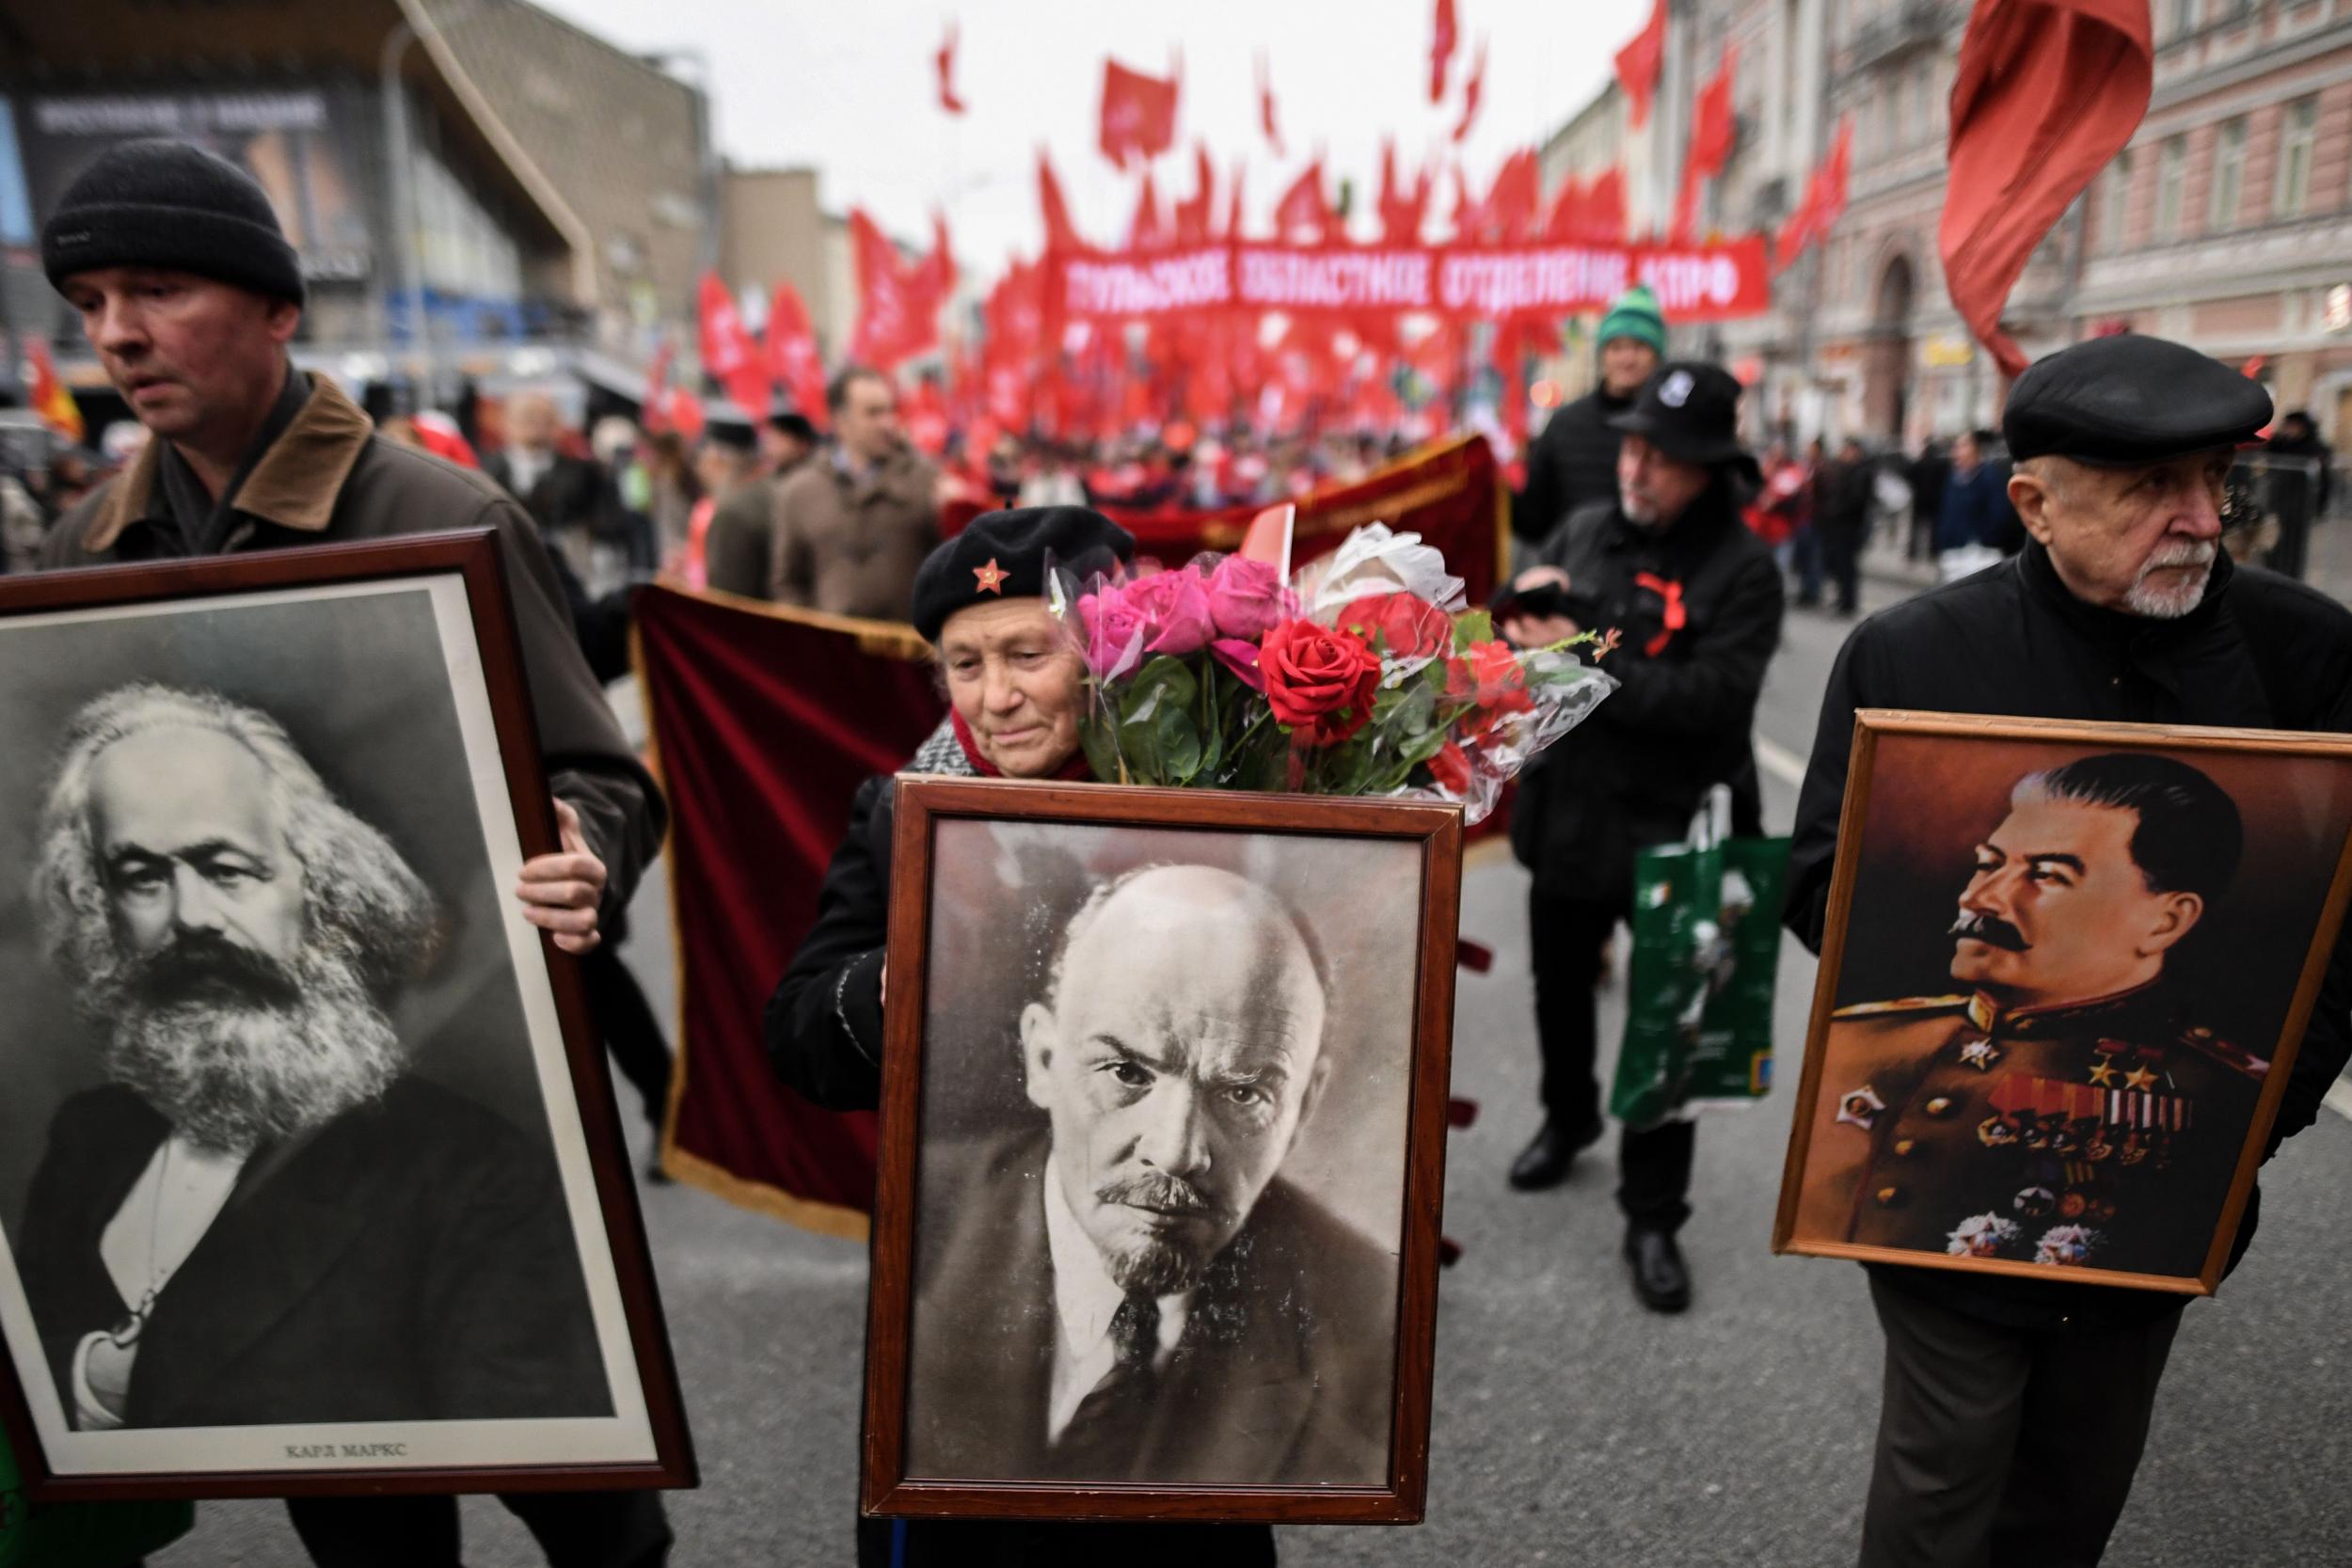  Russian Communist supporters holding portraits of Karl Marx, Vladimir Lenin and Joseph Stalin participate in a rally marking the anniversary of the 1917 Bolshevik Revolution in downtown Moscow